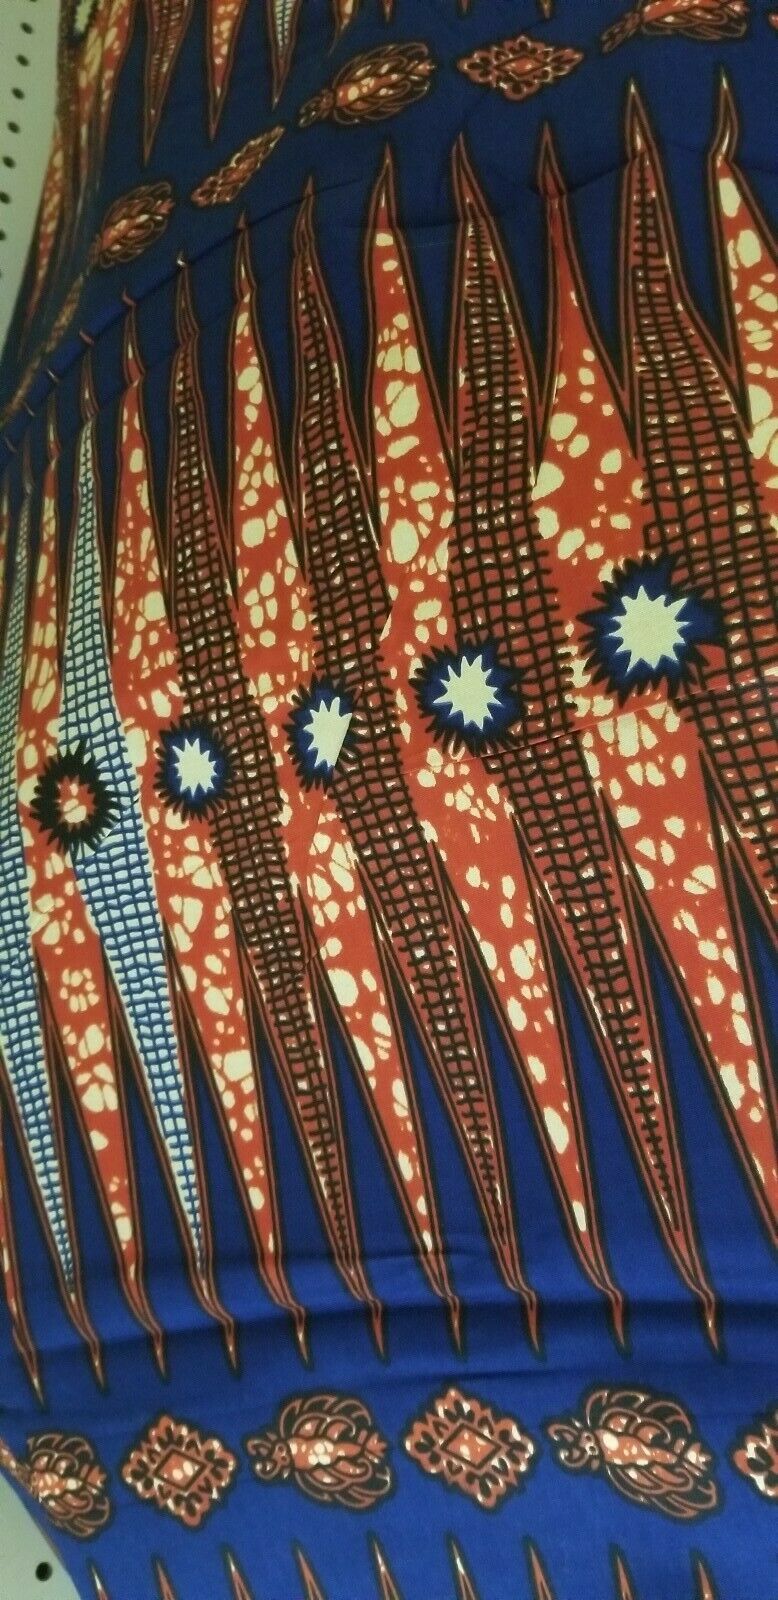 MULTICOLOR African Wax Print 100% Cotton Fabric (44 in.) $6 per yard